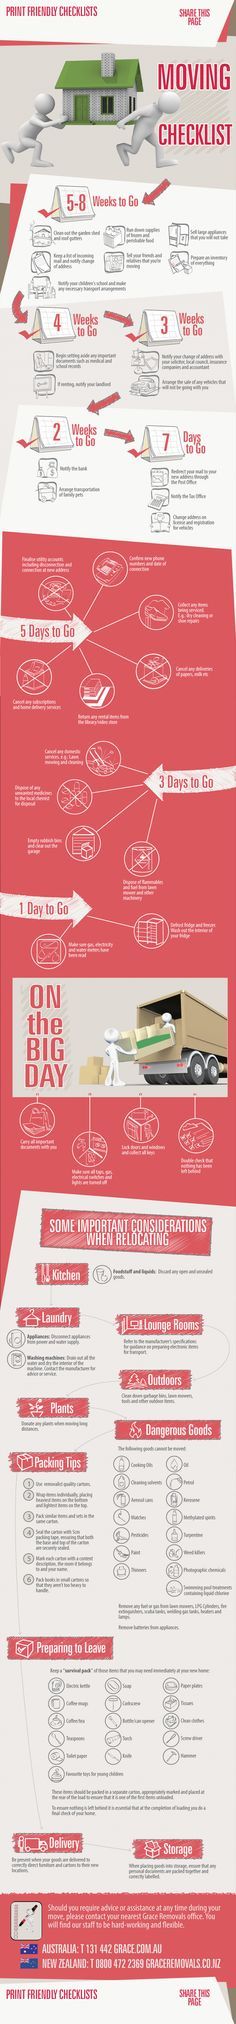 Psychology-Infographic-Moving-Checklist-Infographic-Few-things-in-life-seem-to-be-able-to-cause-mor Psychology Infographic : Moving Checklist [Infographic] - Few things in life seem to be able to cause mor...